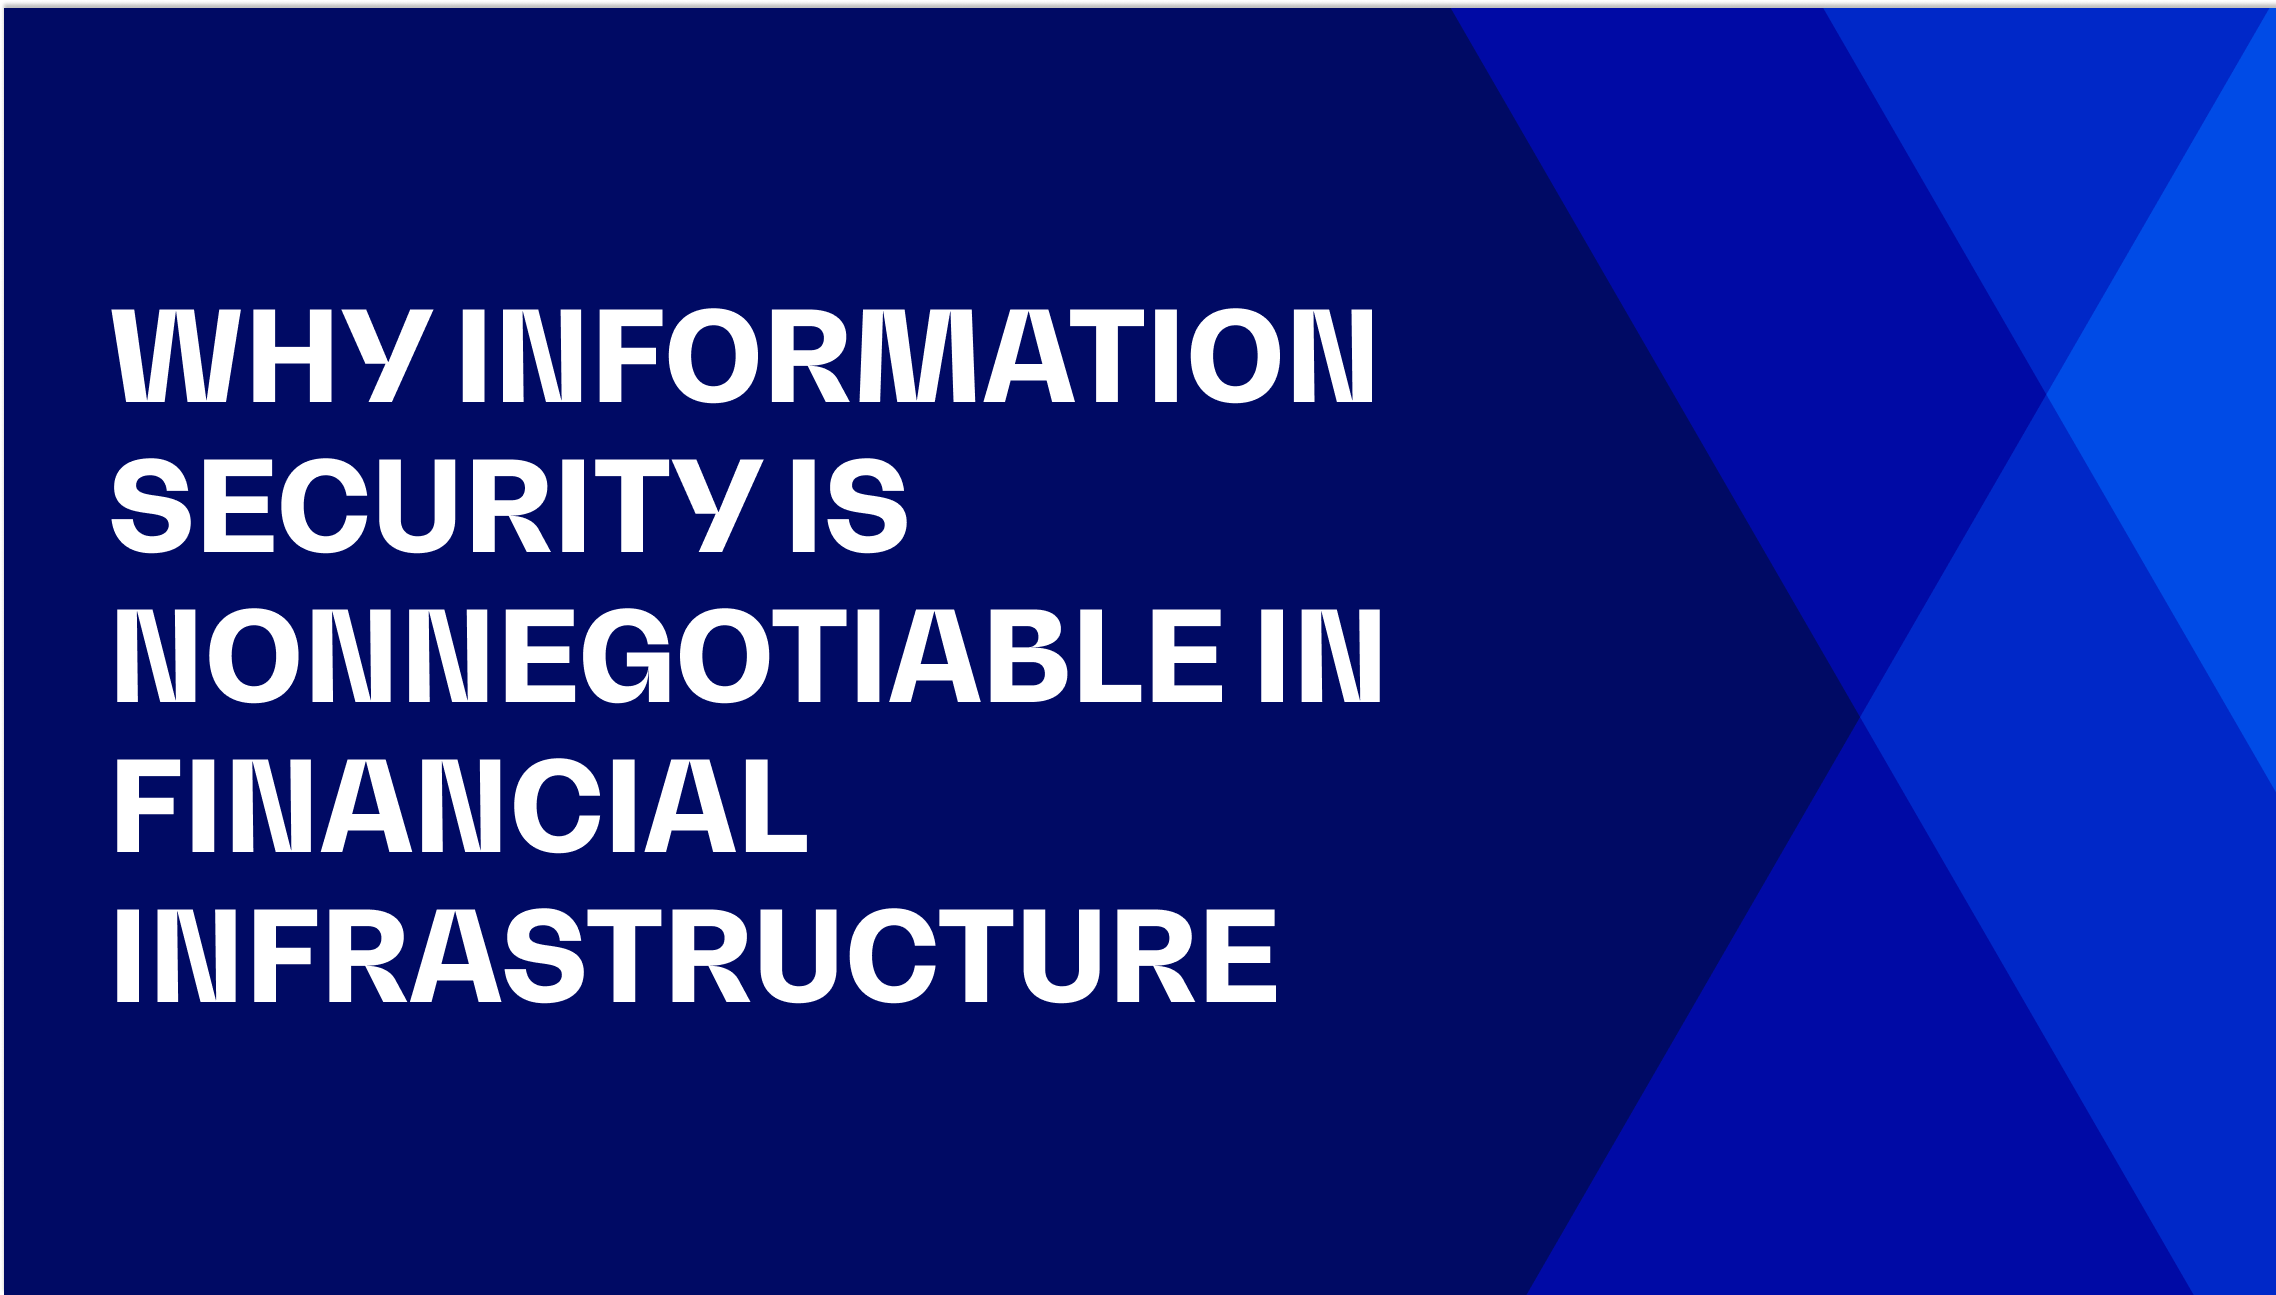 Why Information Security Is Nonnegotiable in Financial Infrastructure